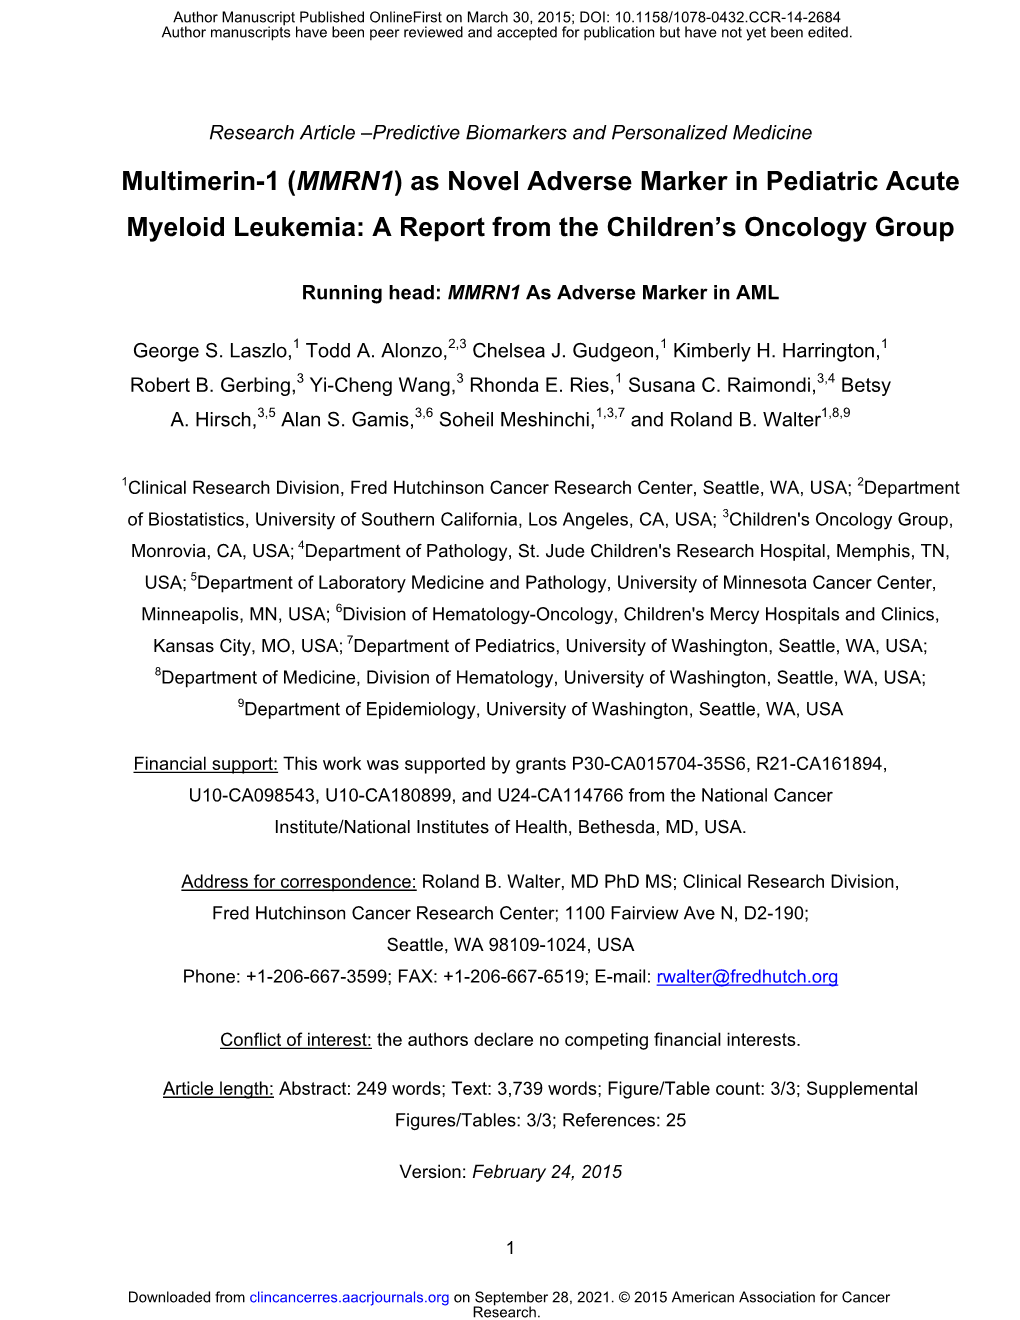 MMRN1) As Novel Adverse Marker in Pediatric Acute Myeloid Leukemia: a Report from the Children’S Oncology Group